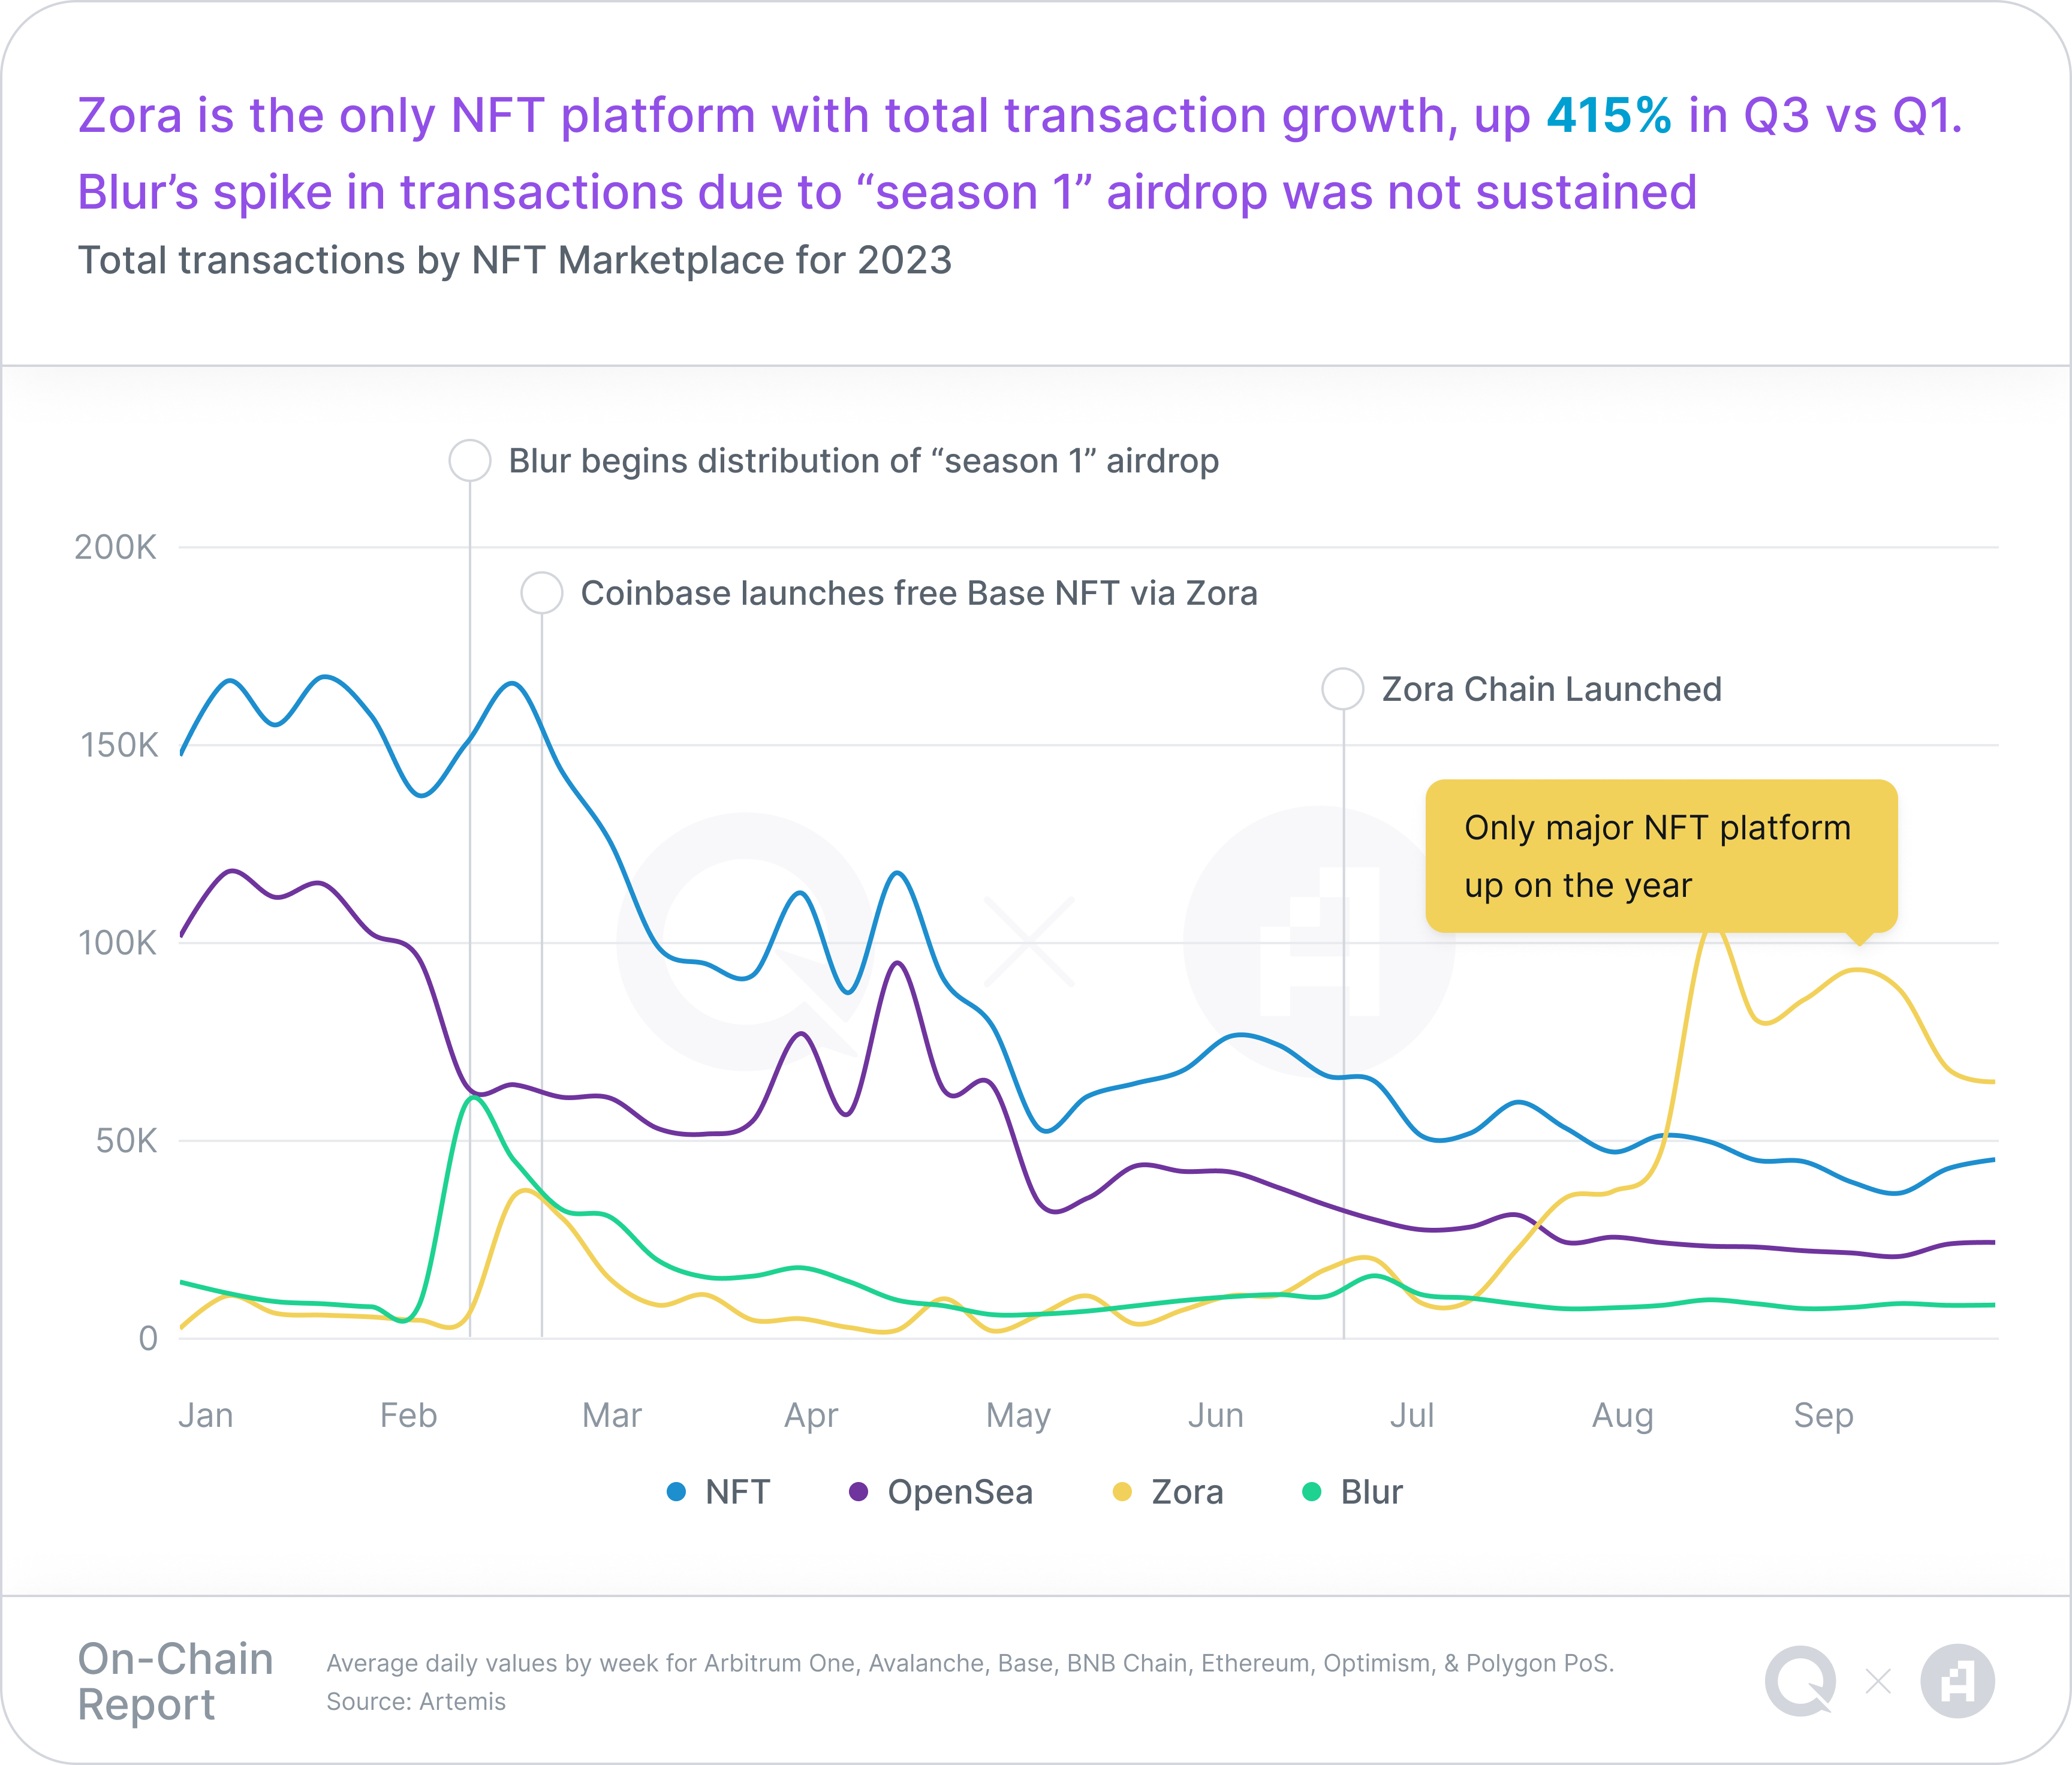 A chart representing Total transactions by NFT Marketplace for 2023, with a takeaway headline of "Zora is the only NFT platform with total transaction growth, up 415% in Q3 vs Q1. Blur’s spike in transactions due to “season 1” airdrop was not sustained"